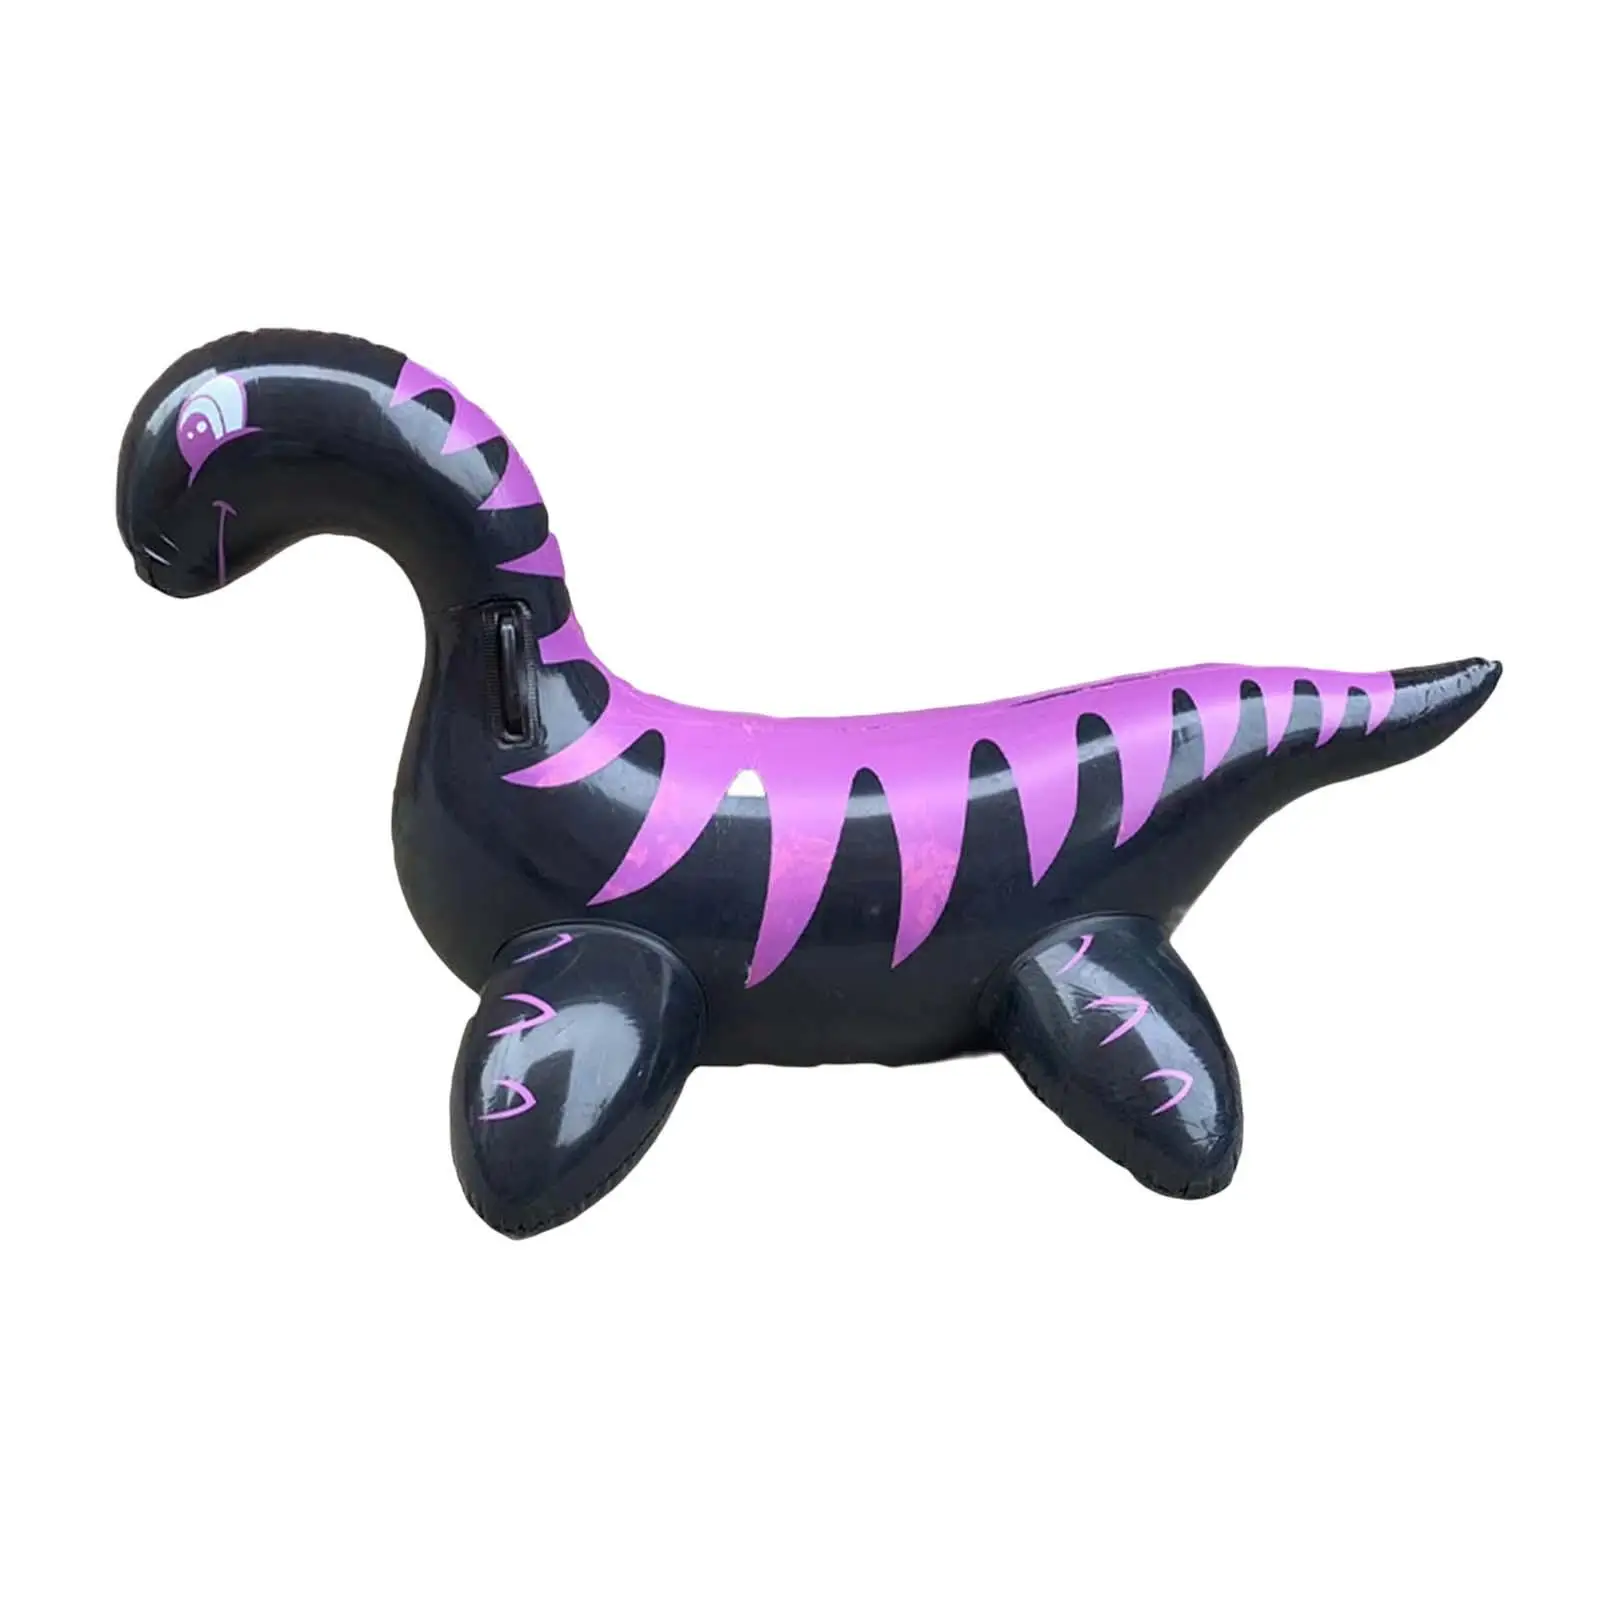 Dinosaur Pool Floats Ride Ons Inflatable Pool Toys for Swimming Party Summer